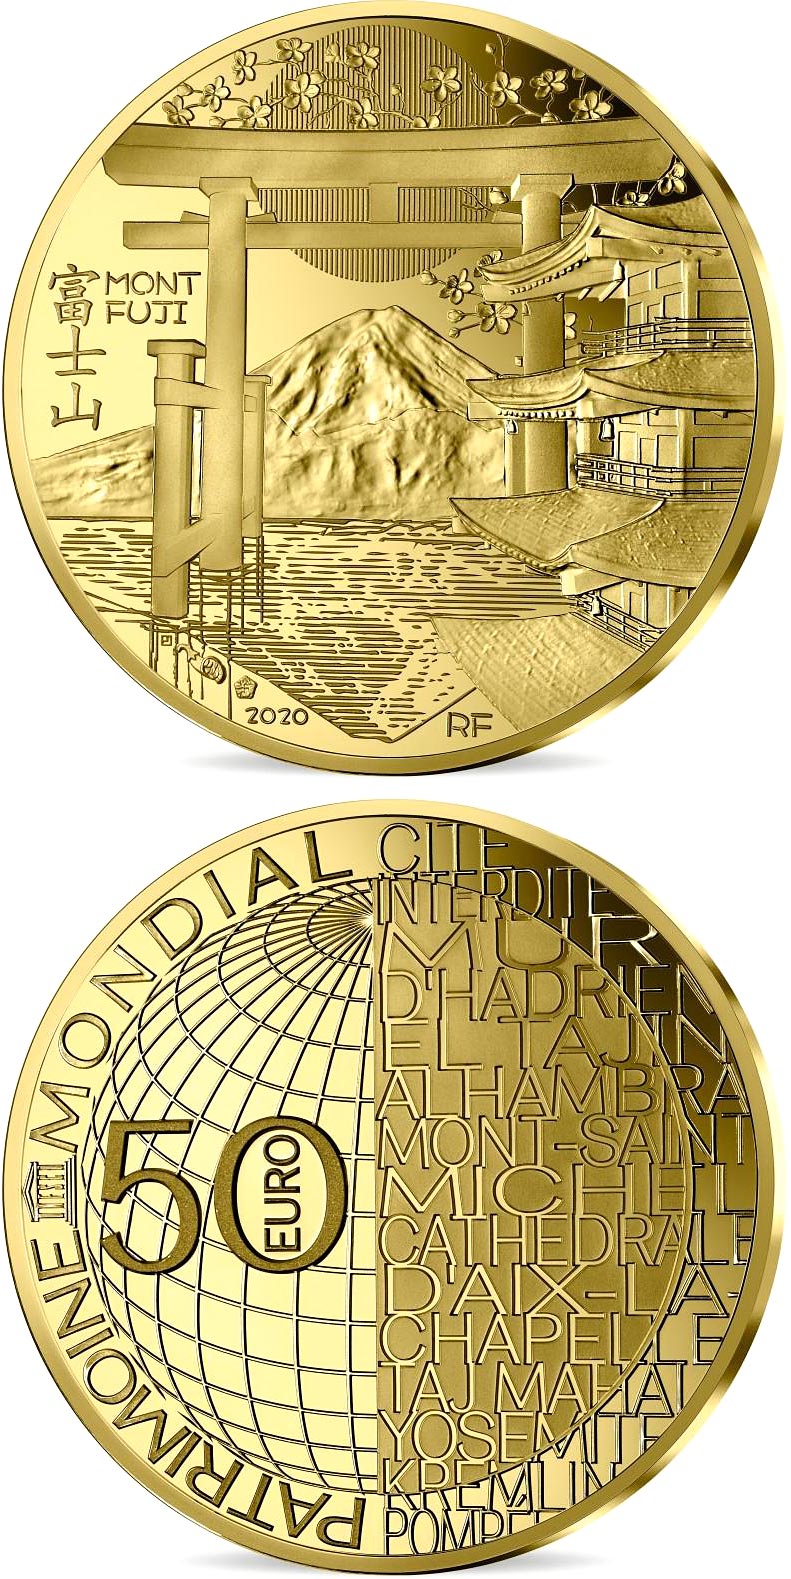 Image of 50 euro coin - Mont Fuji | France 2020.  The Gold coin is of Proof quality.